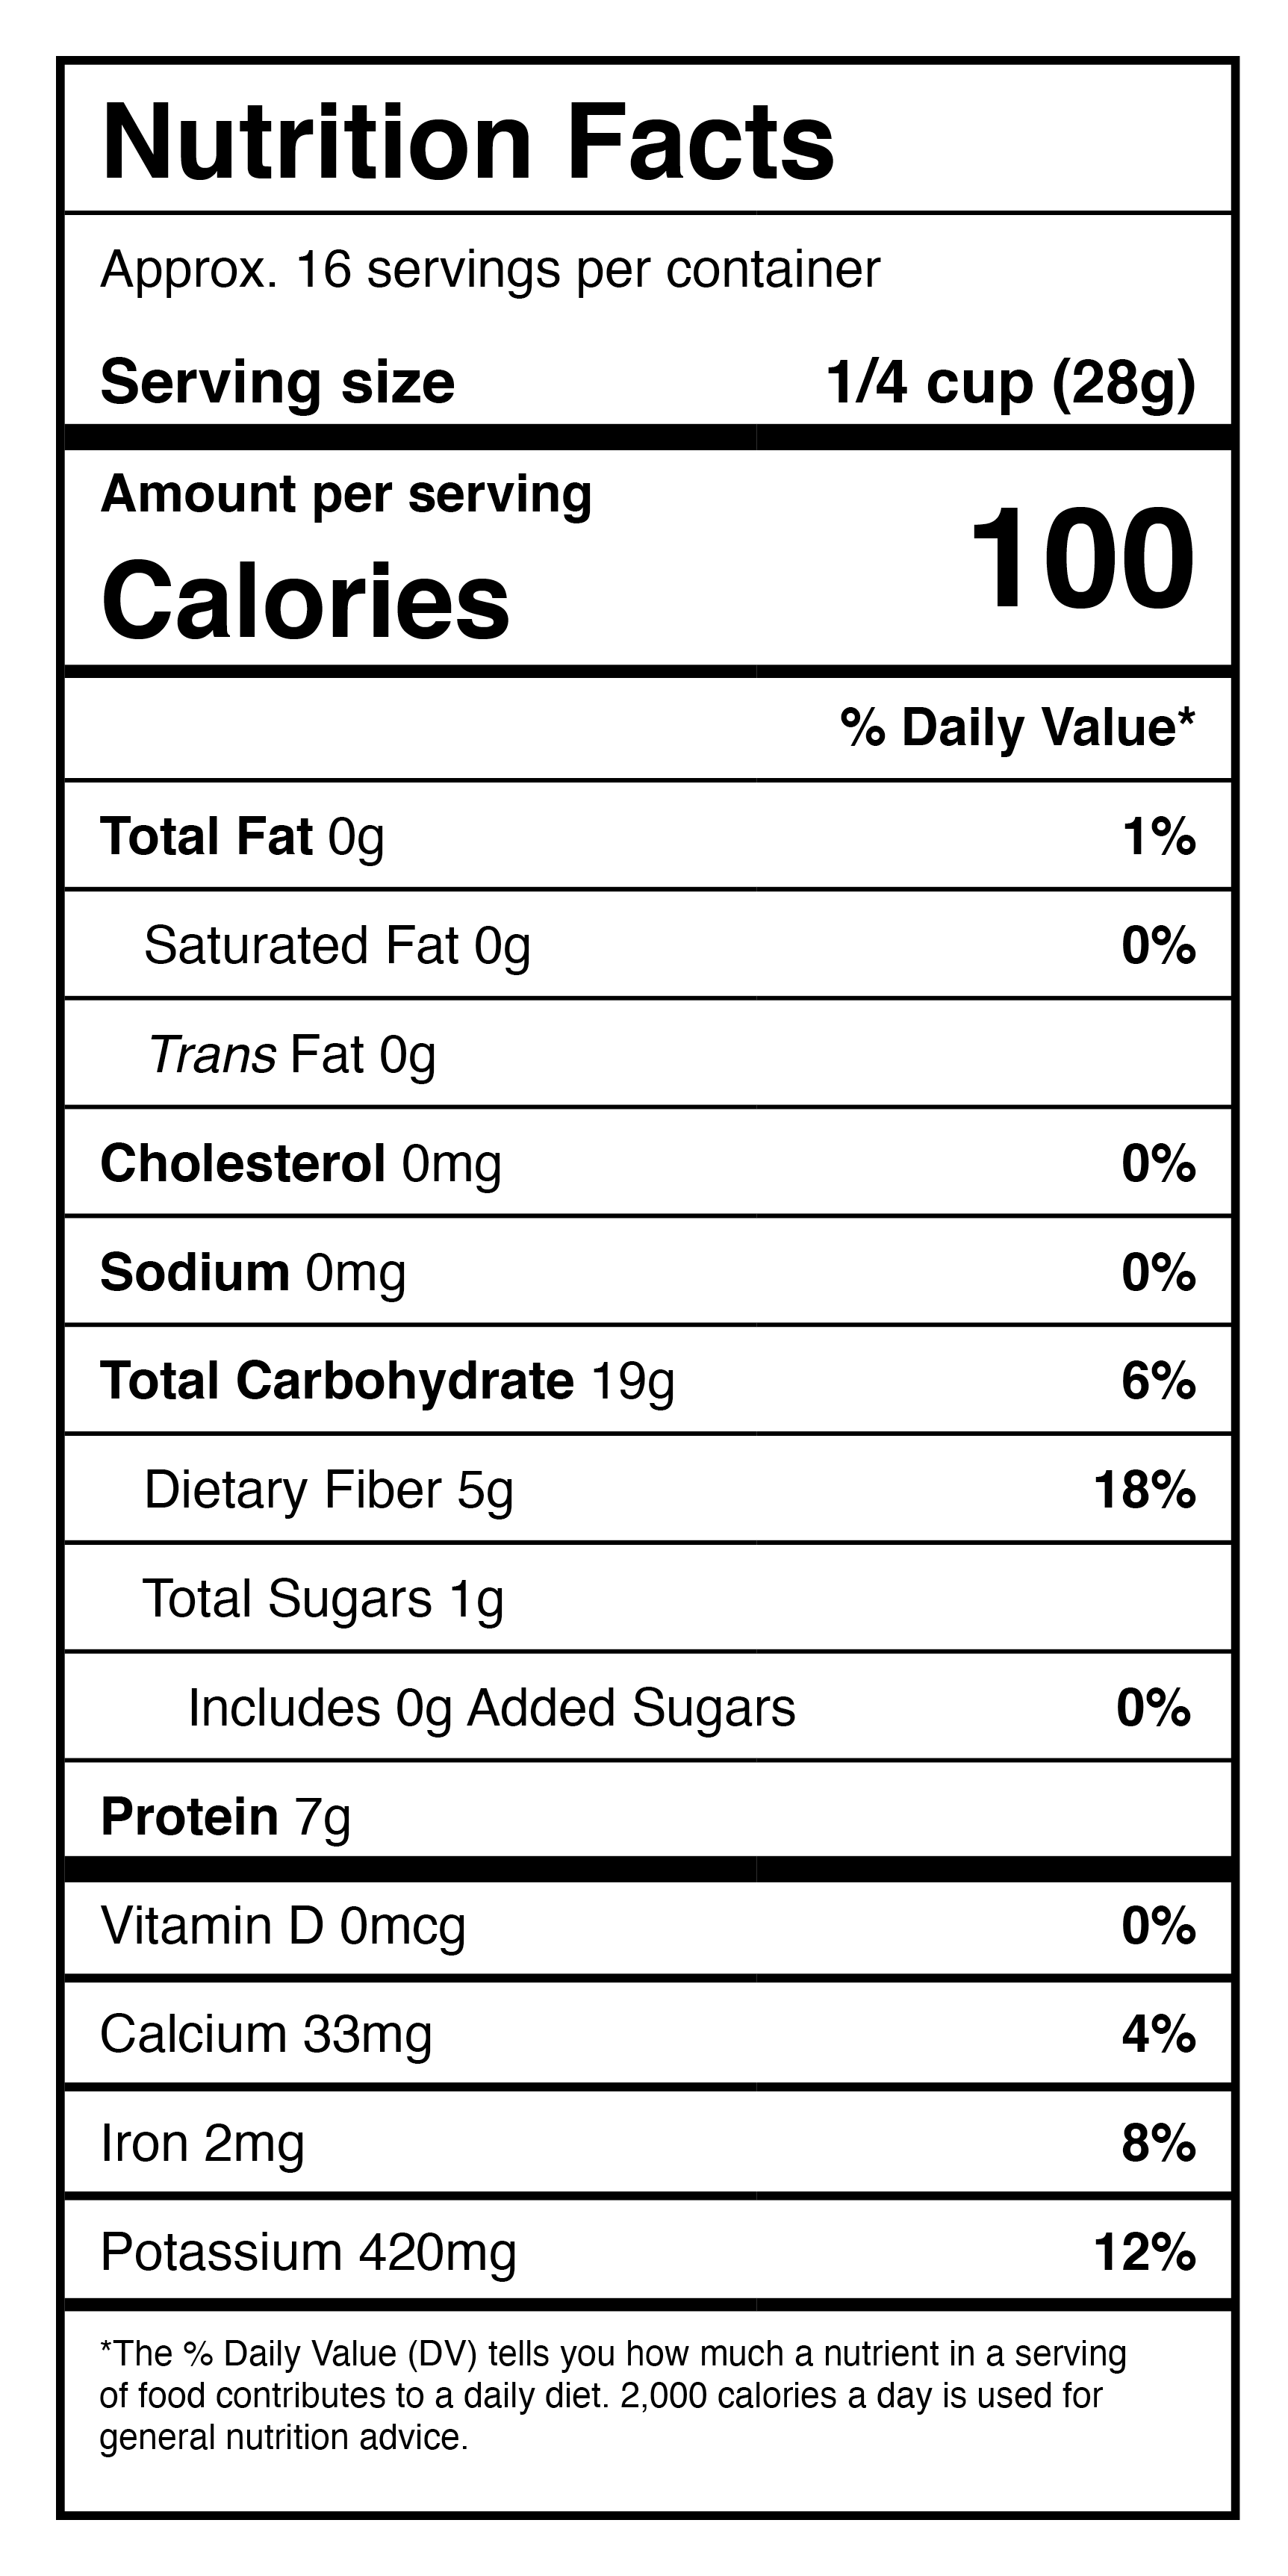 A nutrition label showing the nutrition facts of Harmony House Pinto Beans.